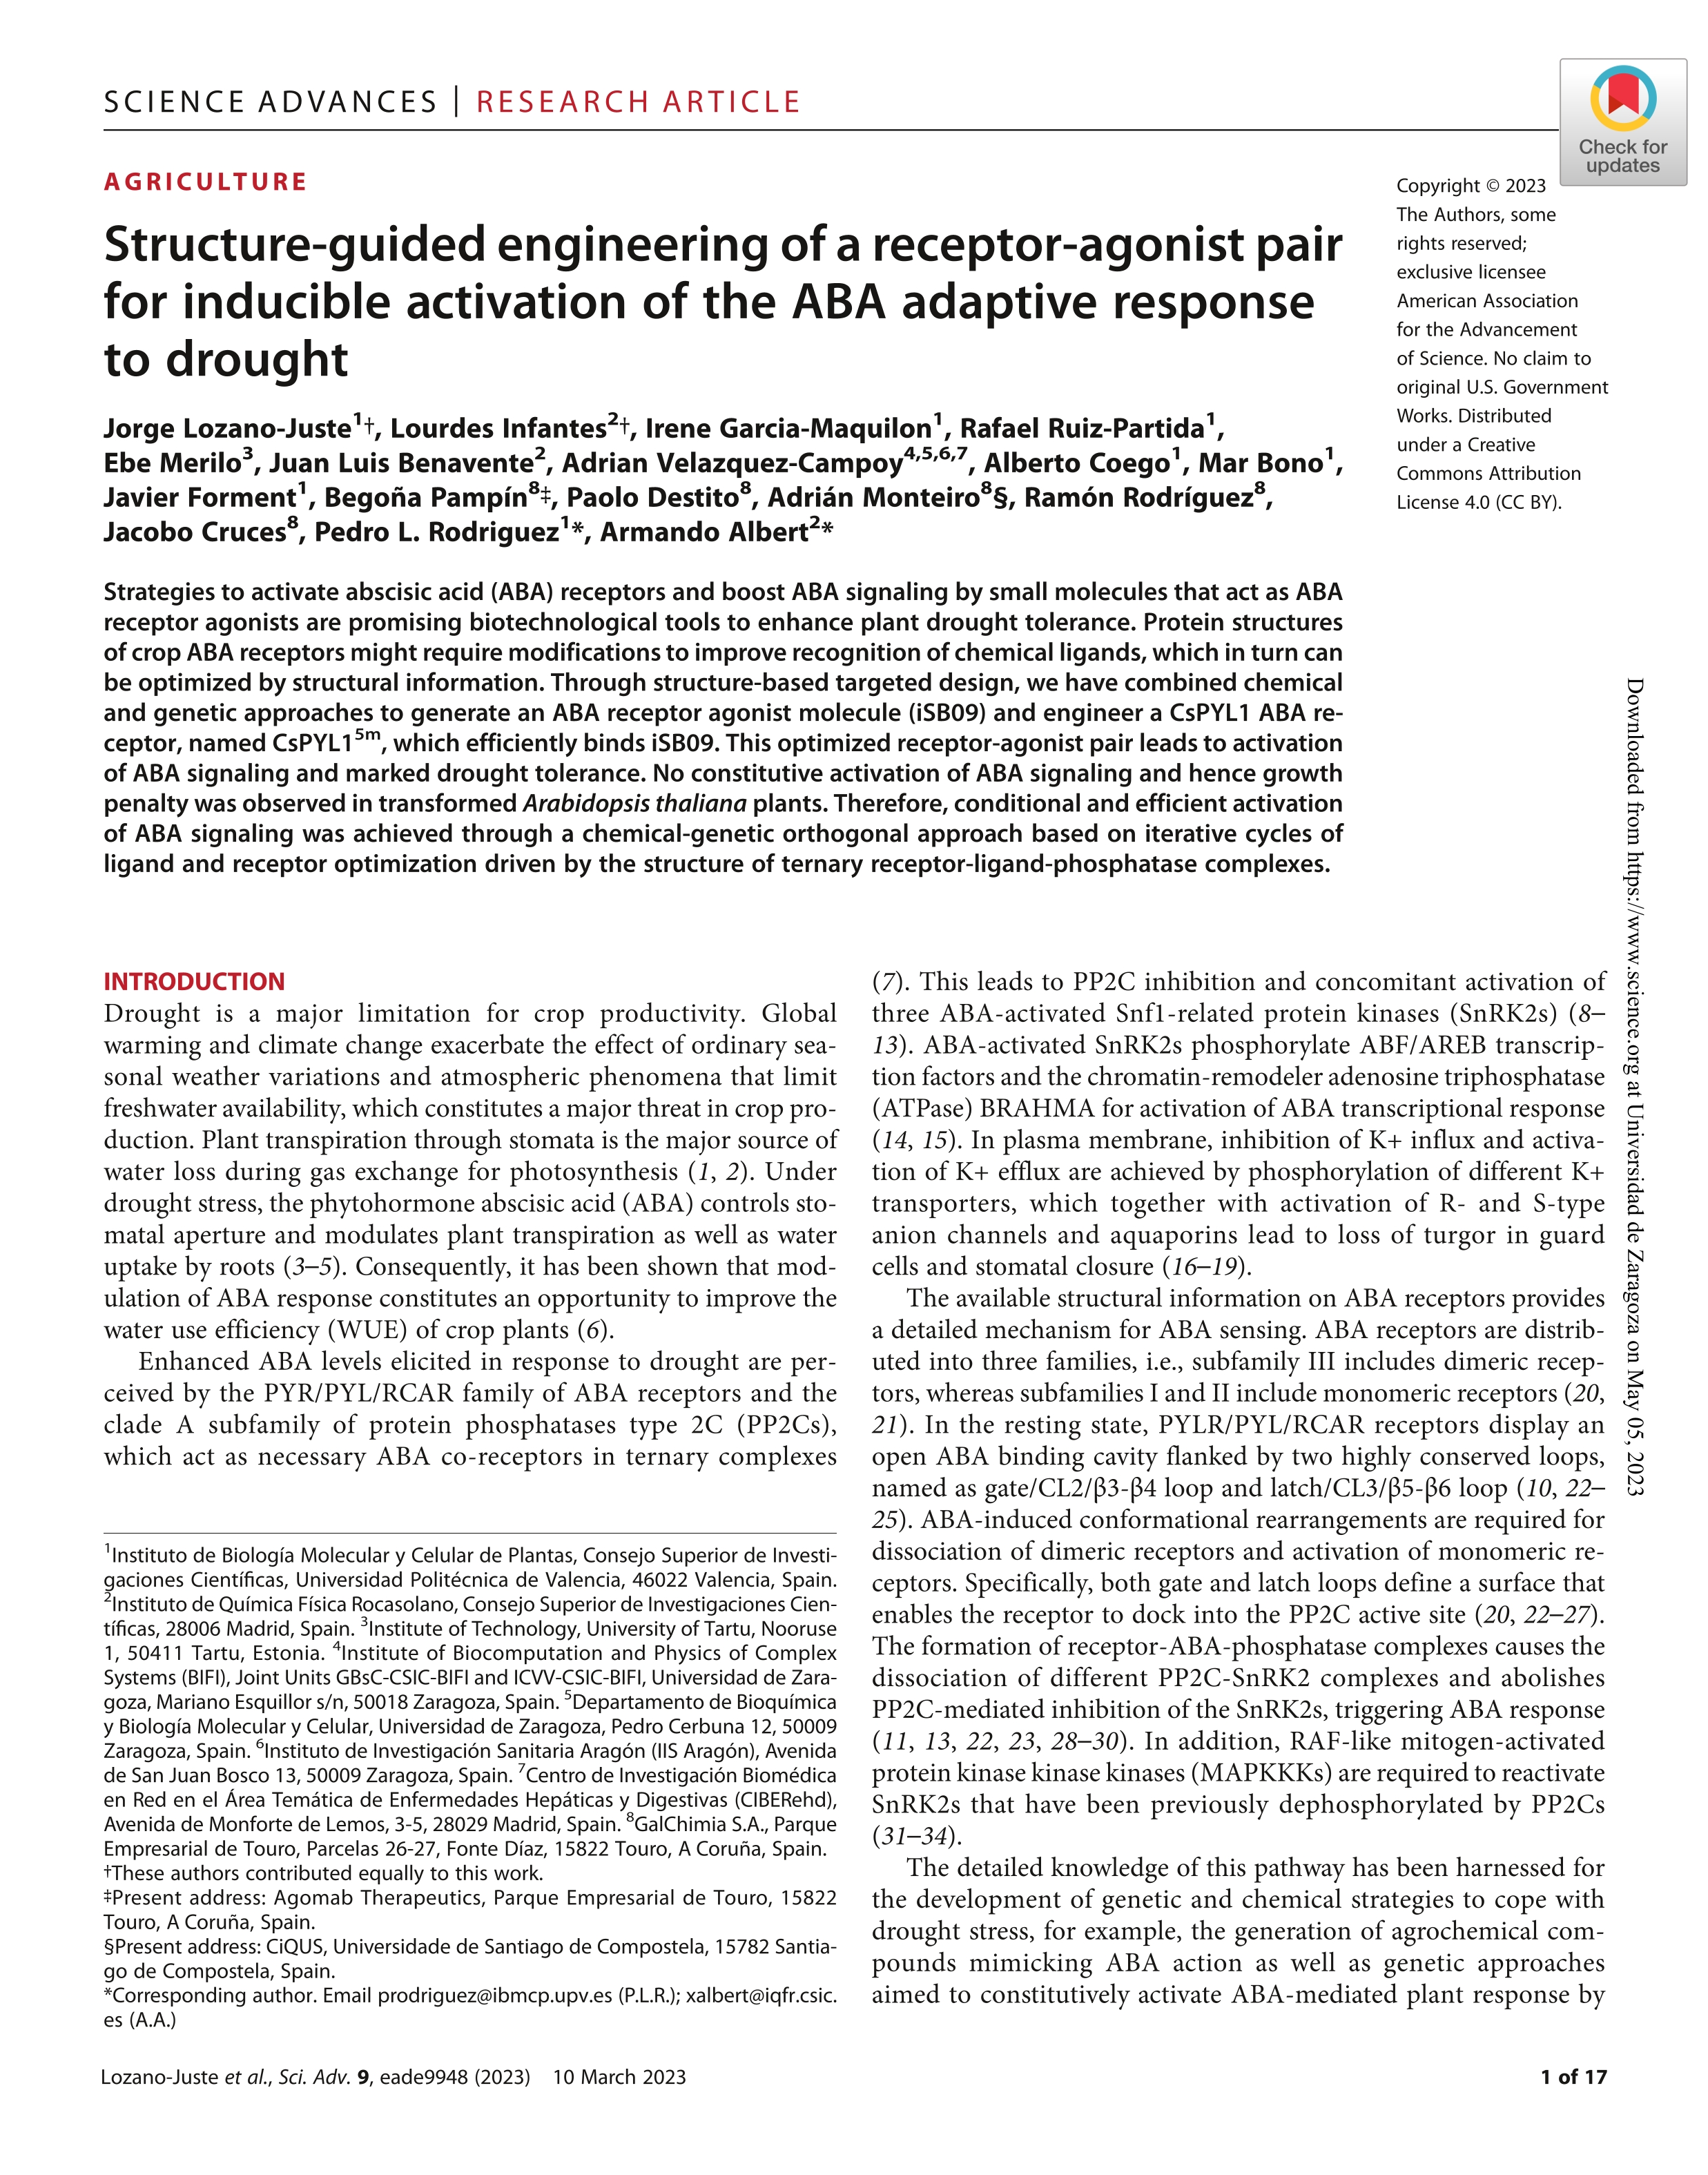 Structure-guided engineering of a receptor-agonist pair for inducible activation of the ABA adaptive response to drought